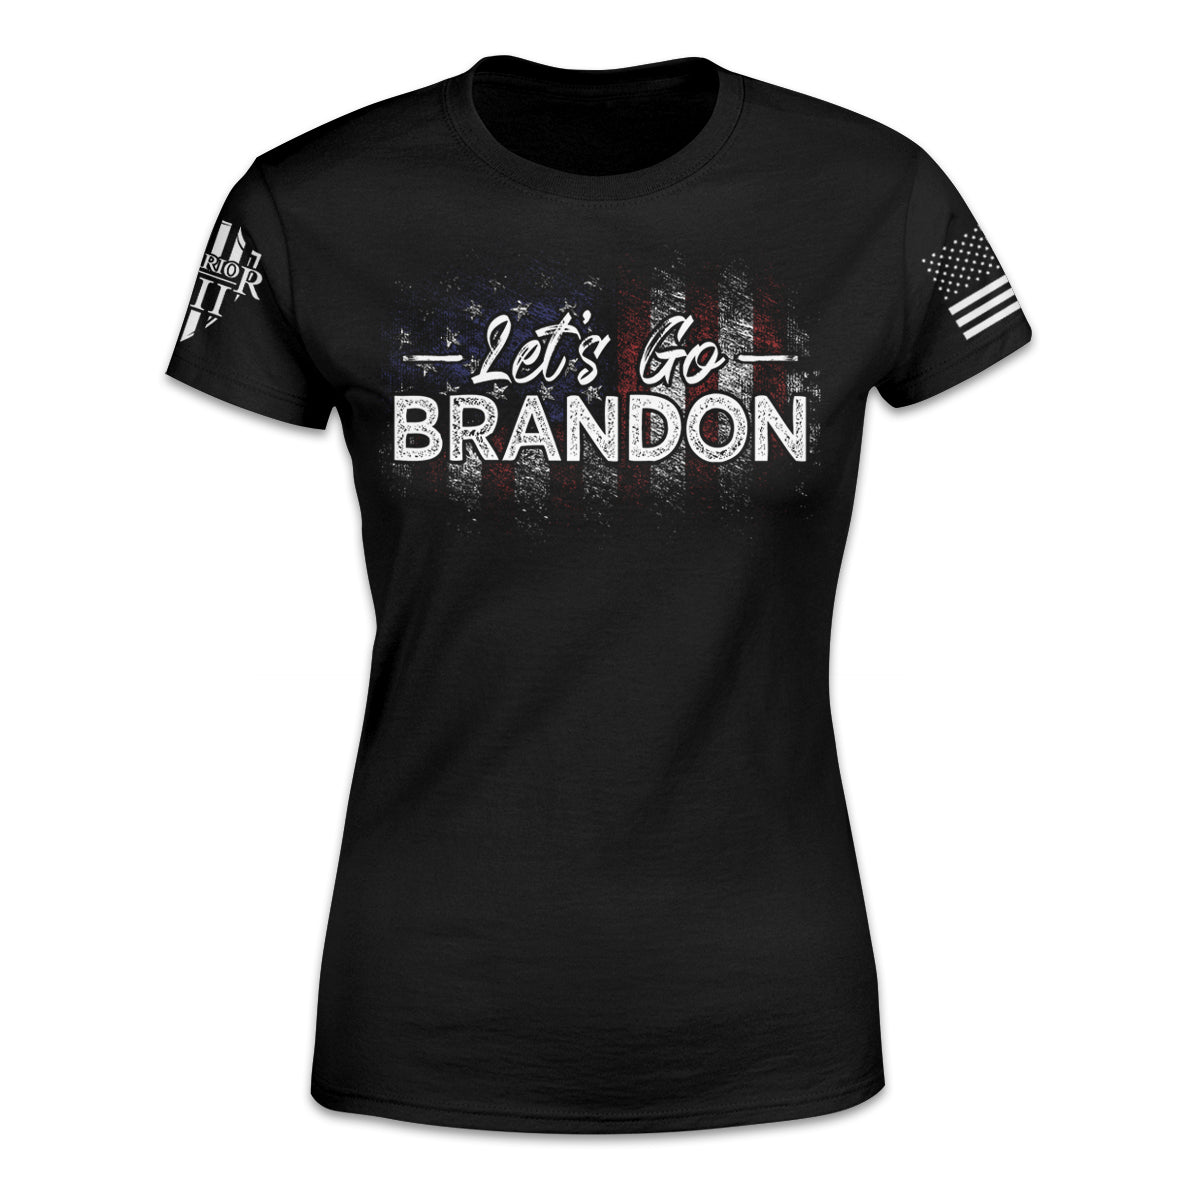 A black women's relaxed fit shirt with the words "Let's Go Brandon" in front of a USA flag printed on the front of the shirt.